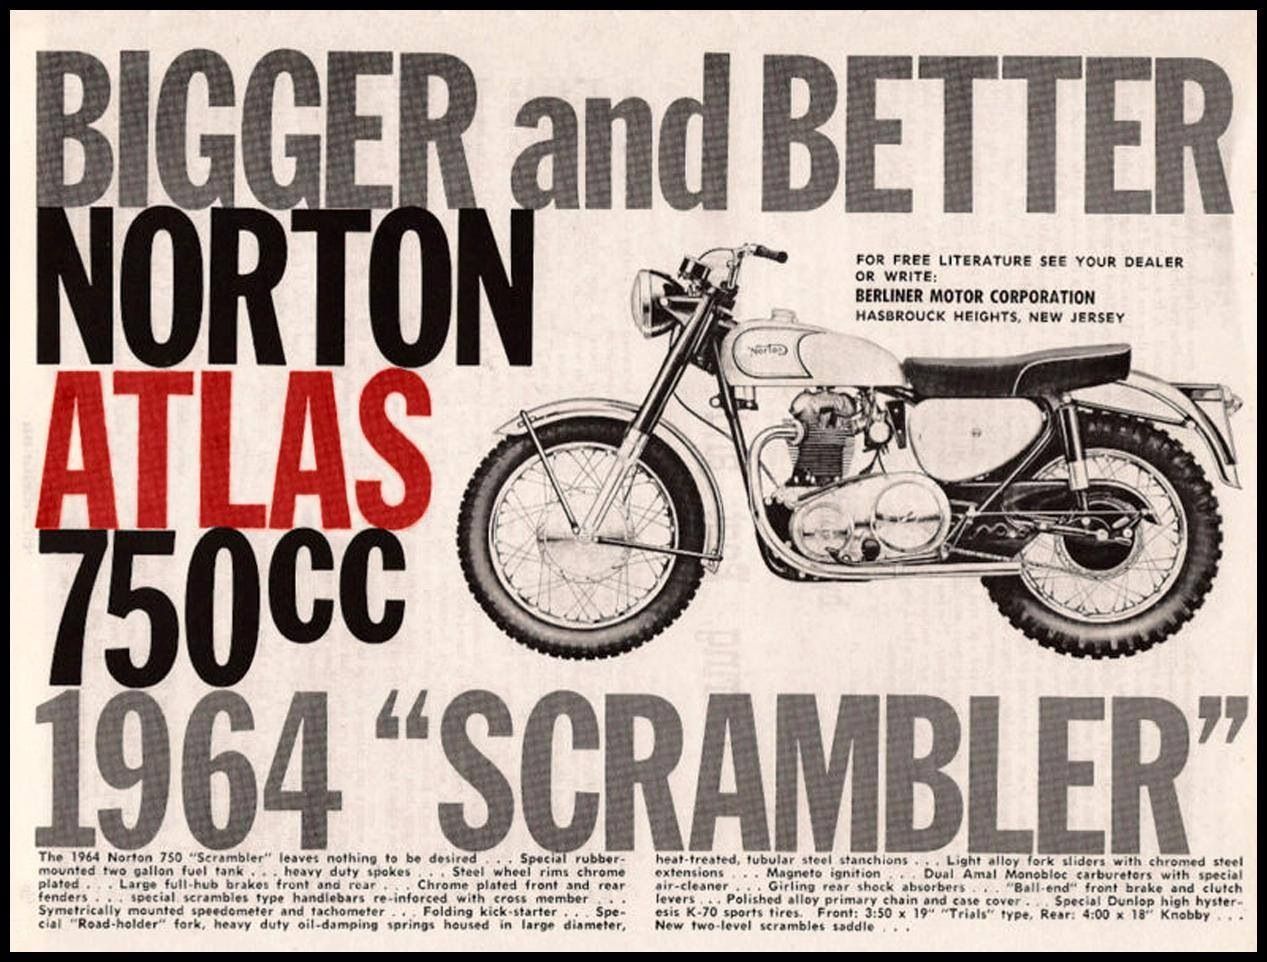 A Brief History Of The Norton P11 P11a And Ranger Everything